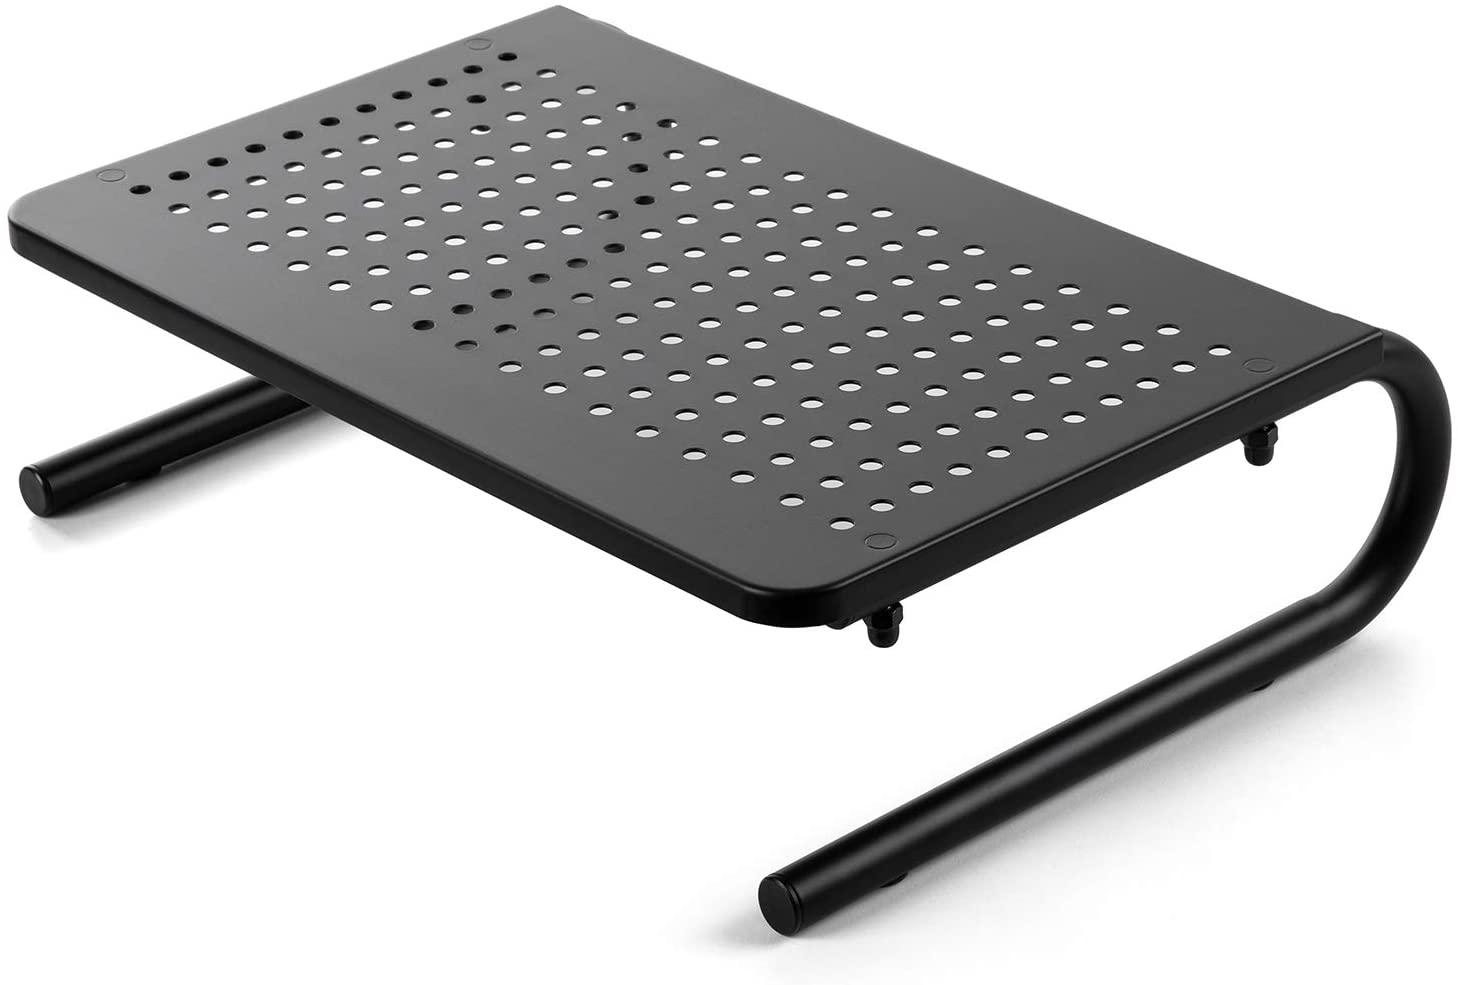 Loryego Monitor Stand for $6.60